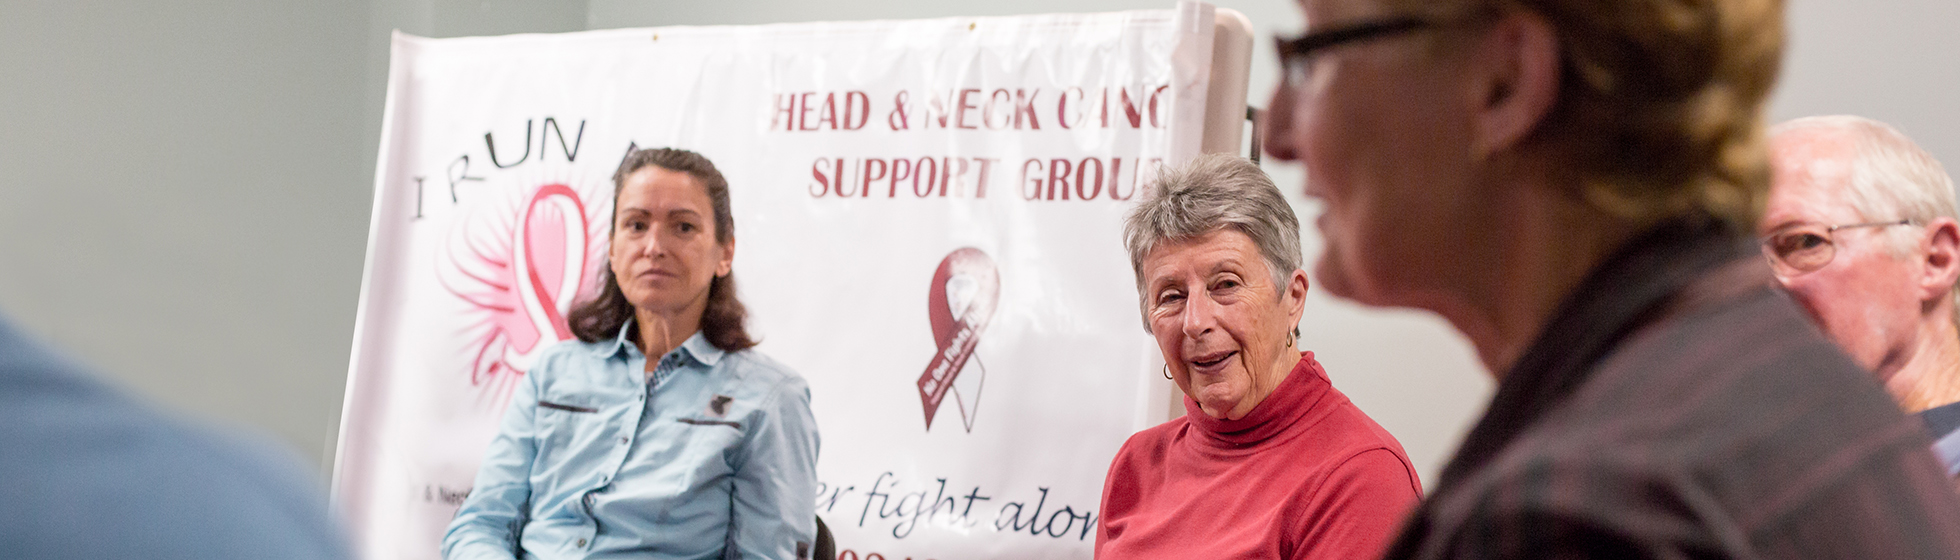 Head and Neck Cancer Support Group